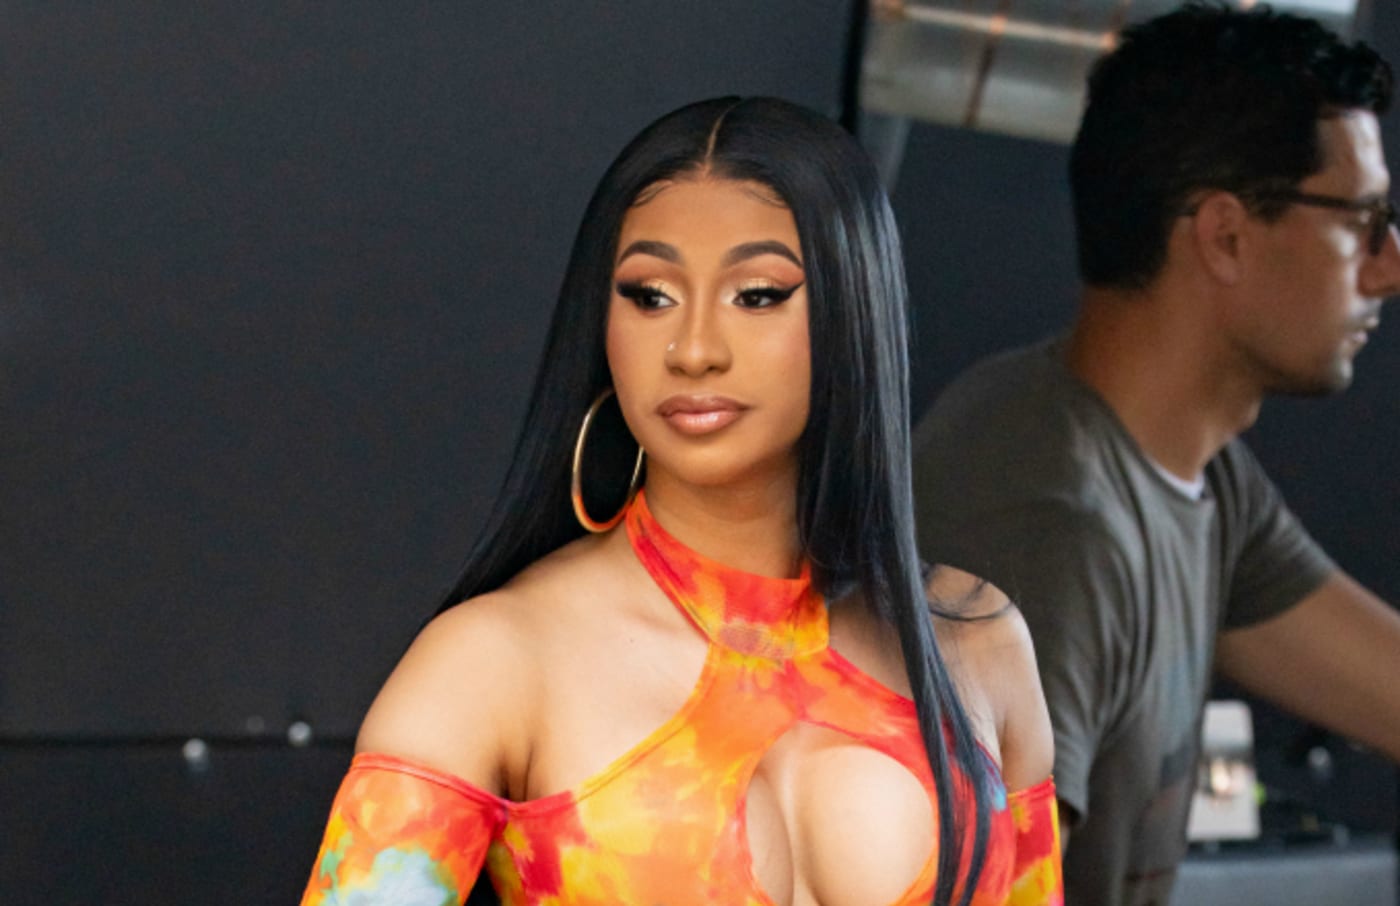 Cardi B is seen at 'Jimmy Kimmel Live' on July 17, 2019